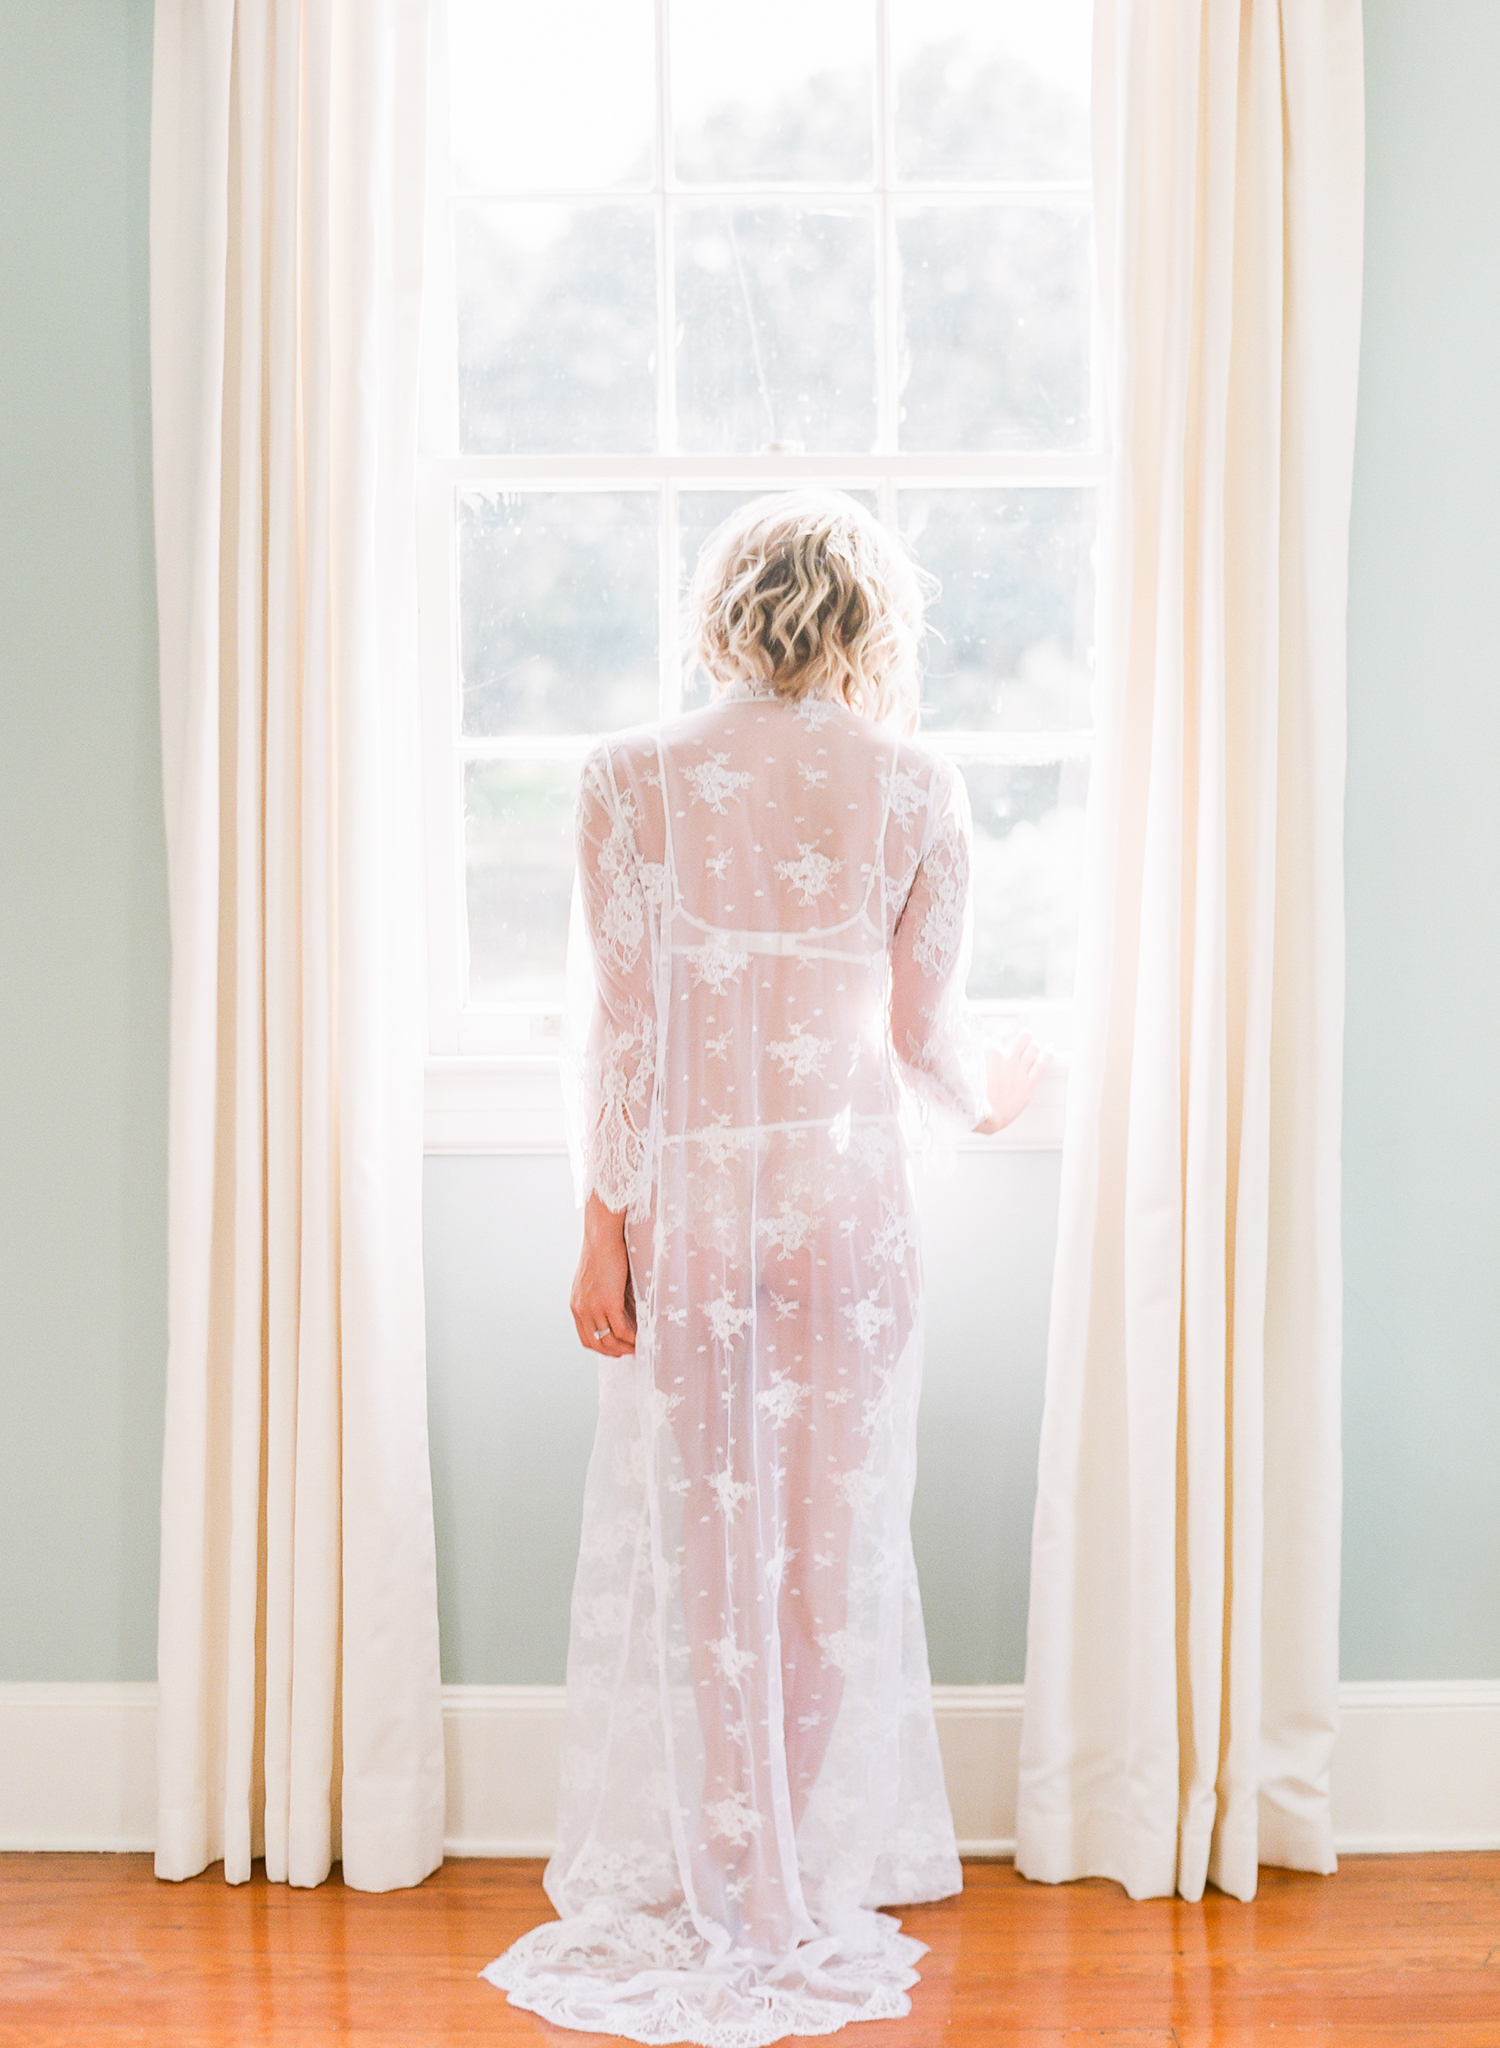 Legare Waring House Wedding Photography | Charleston Wedding Photographer | Charleston Film Photographer | Molly Carr Photography | The Petal Report | Emily Kotarski Bridal | Charleston Boudoir Photography | Illford 3200 Film | Bridal boudoir with veil and crown | The Lace Atelier | Bride Standing by Window with Floor Length Lace Robe